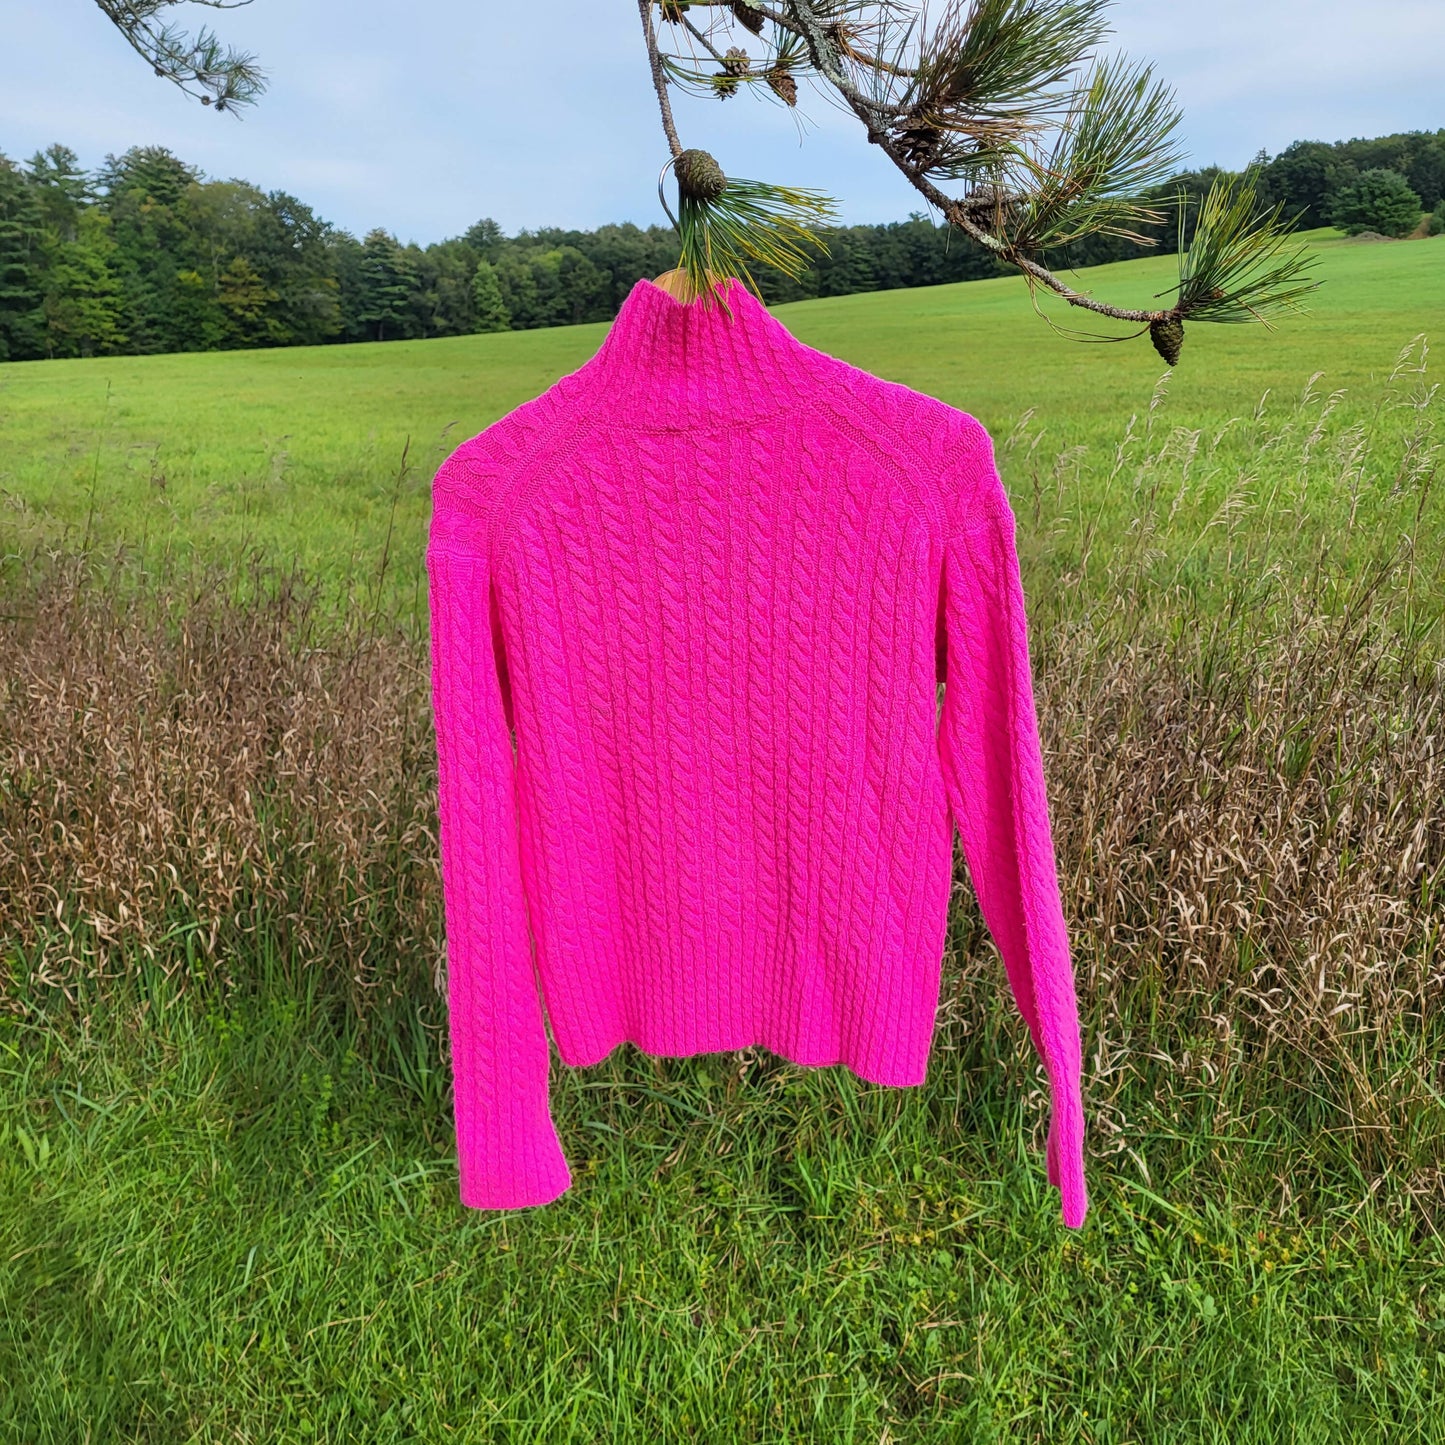 French Connection Babysoft Cable Knit High Neck Sweater - Cable Knit - Pink/Bright Prosecco Pink - S